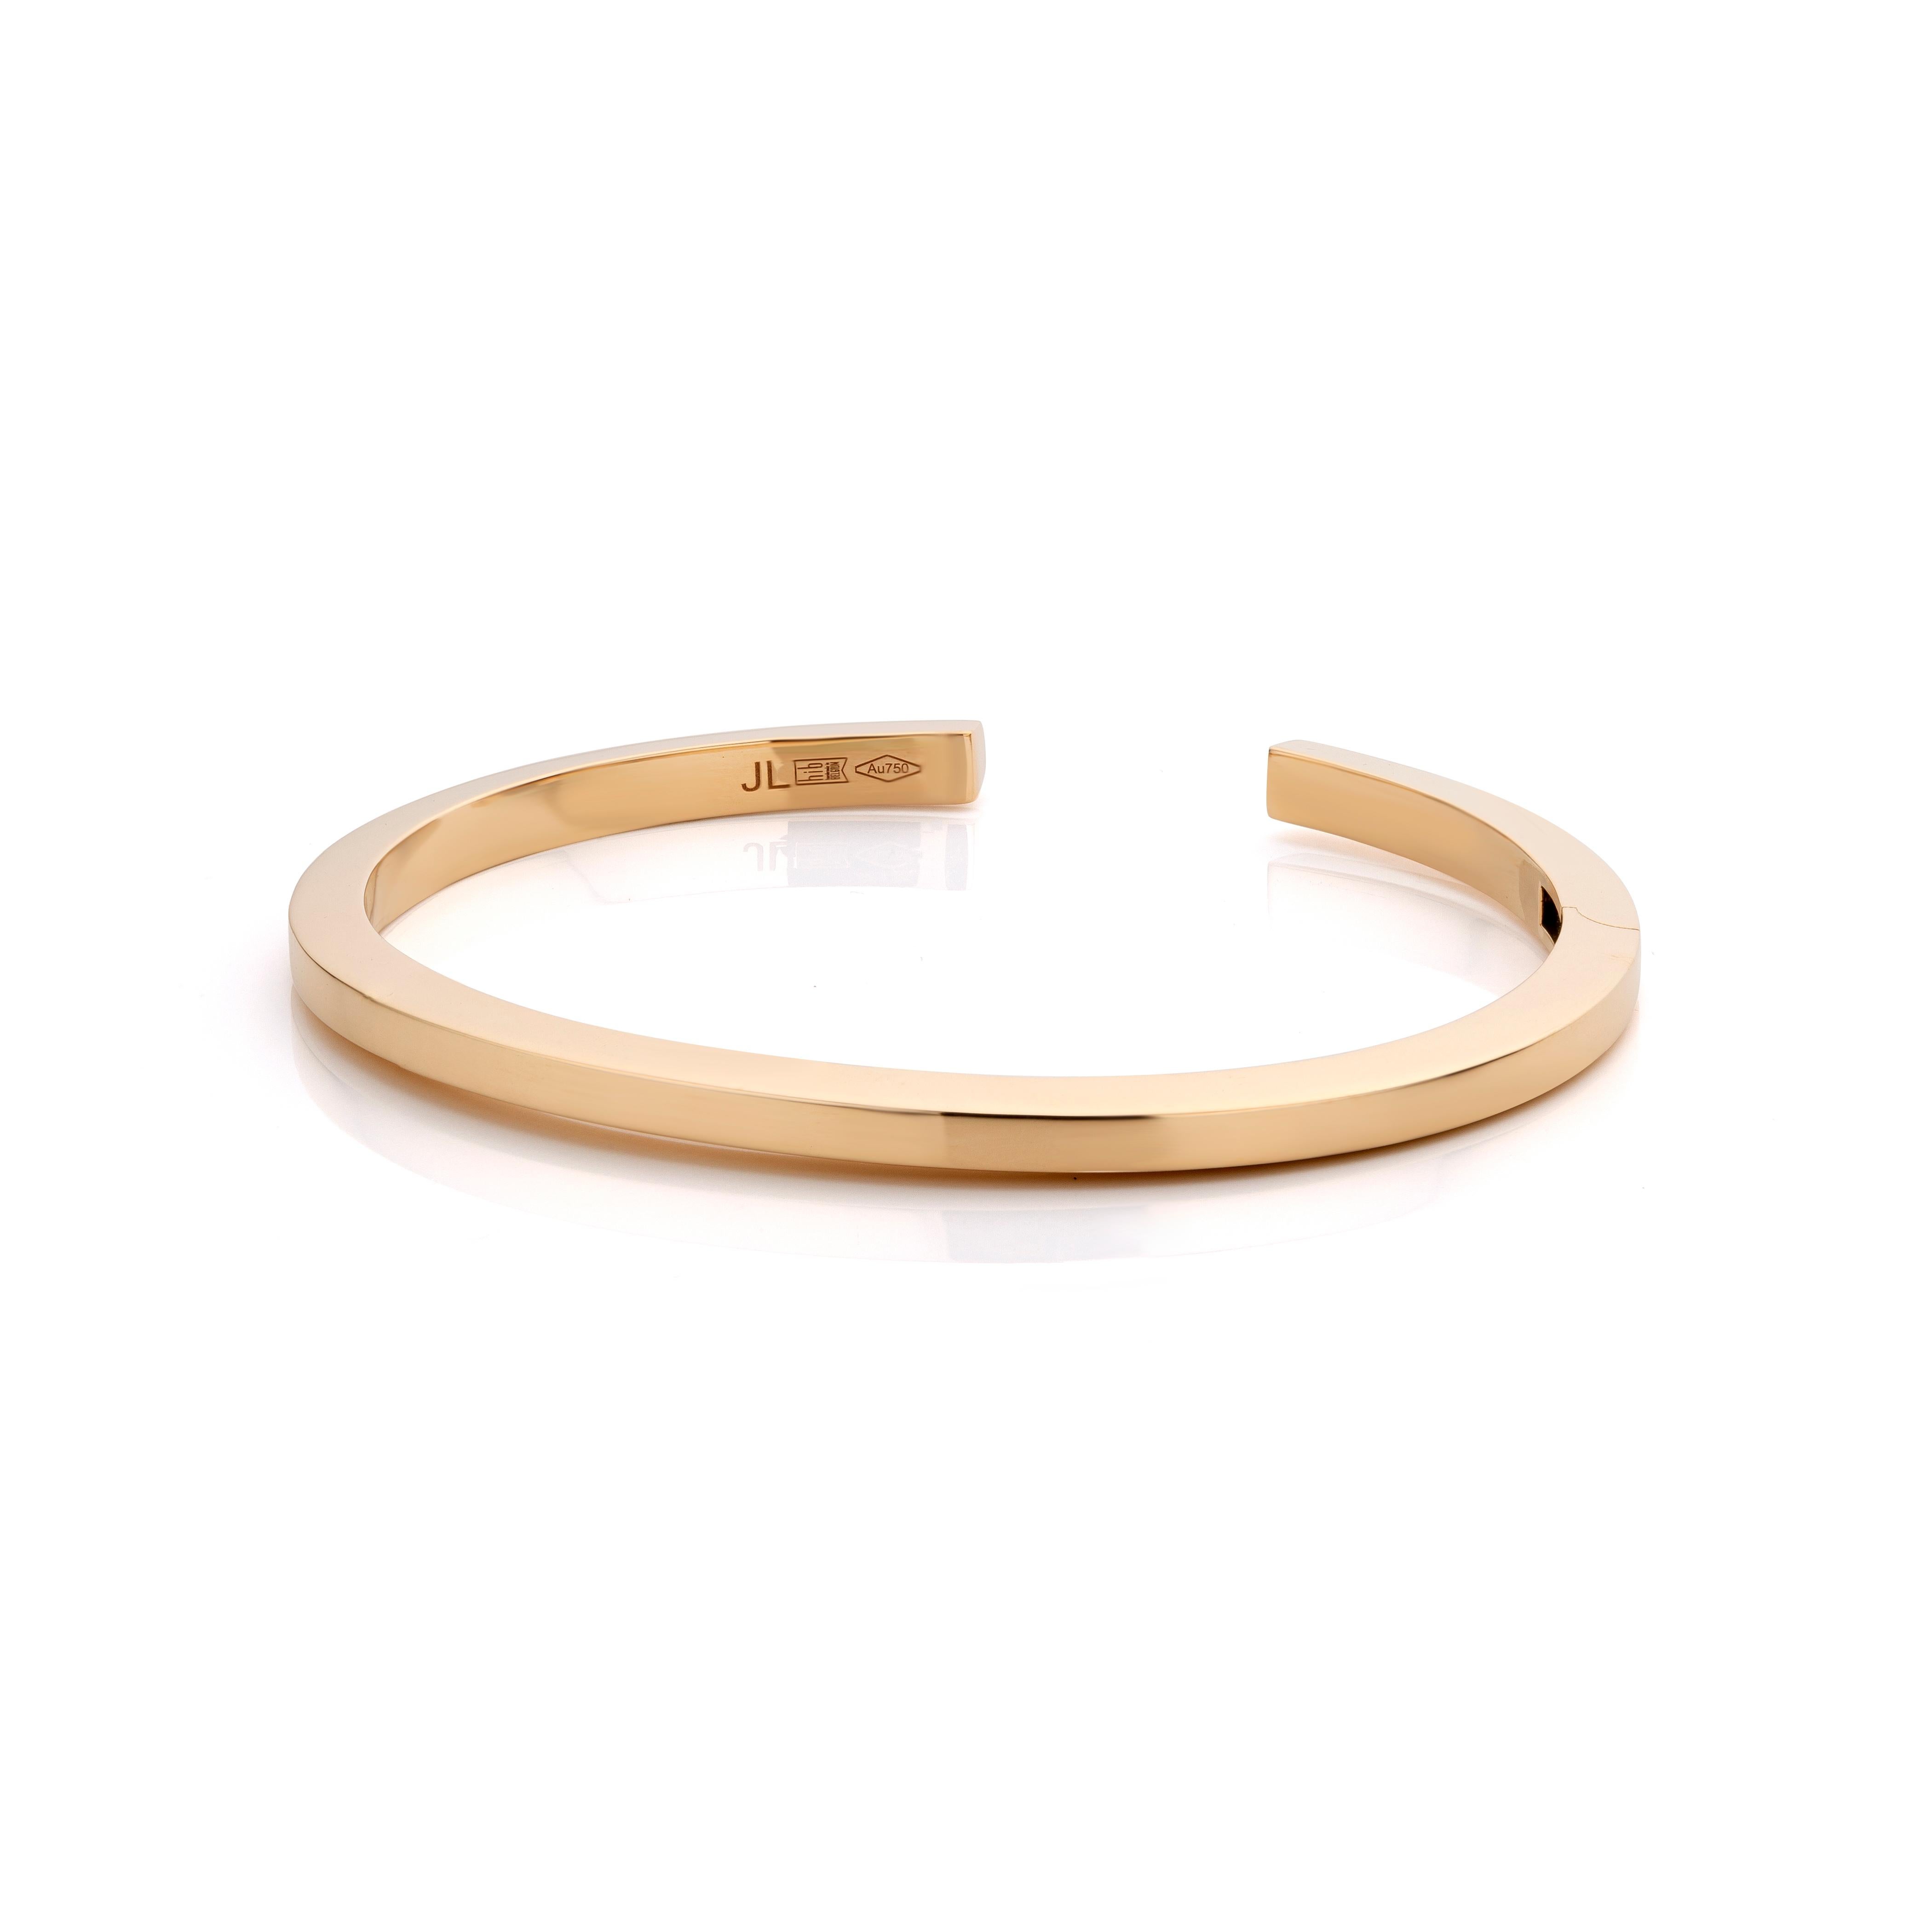 18 Karat Rose gold Bracelet, completed with a polished surface.

This design is one of Jochen Leen's first designs and is highly recognizable.
This bracelet is well suited to be worn as an every day bracelet and is easy to match with other fine